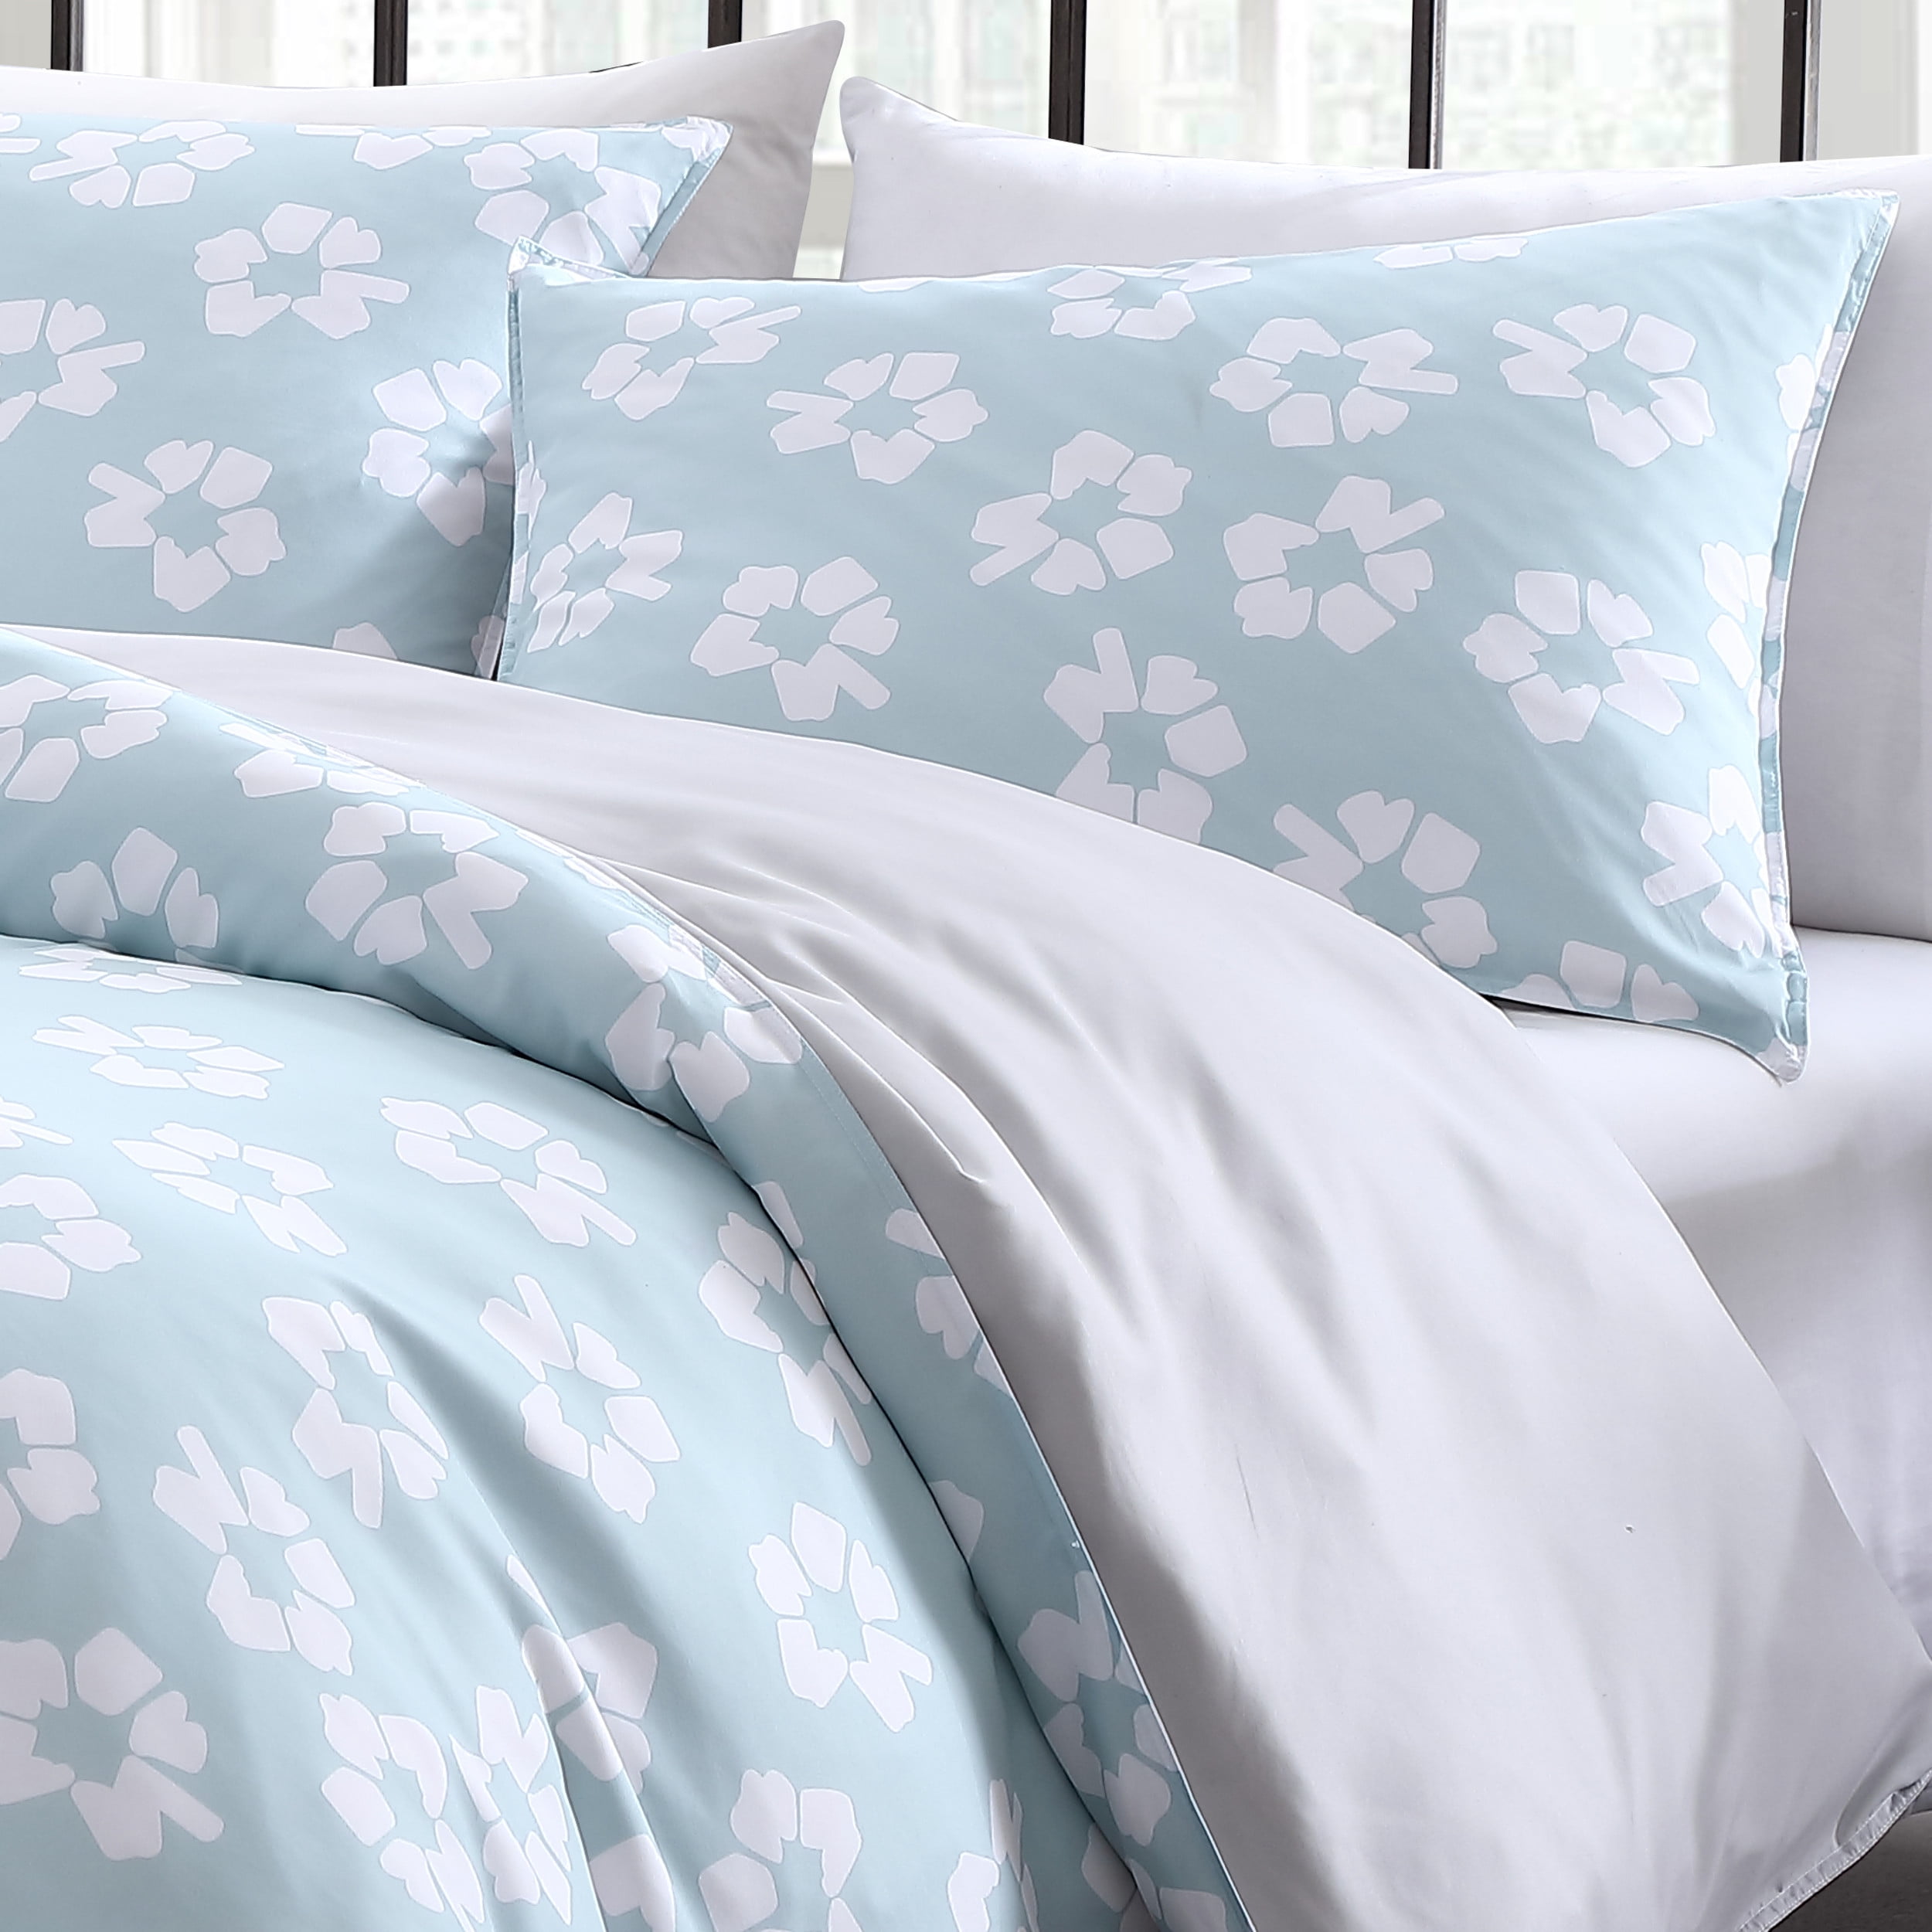 Ultra-Soft & Silky Micro Details about   City ScenePayson Floral CollectionComforter Set 